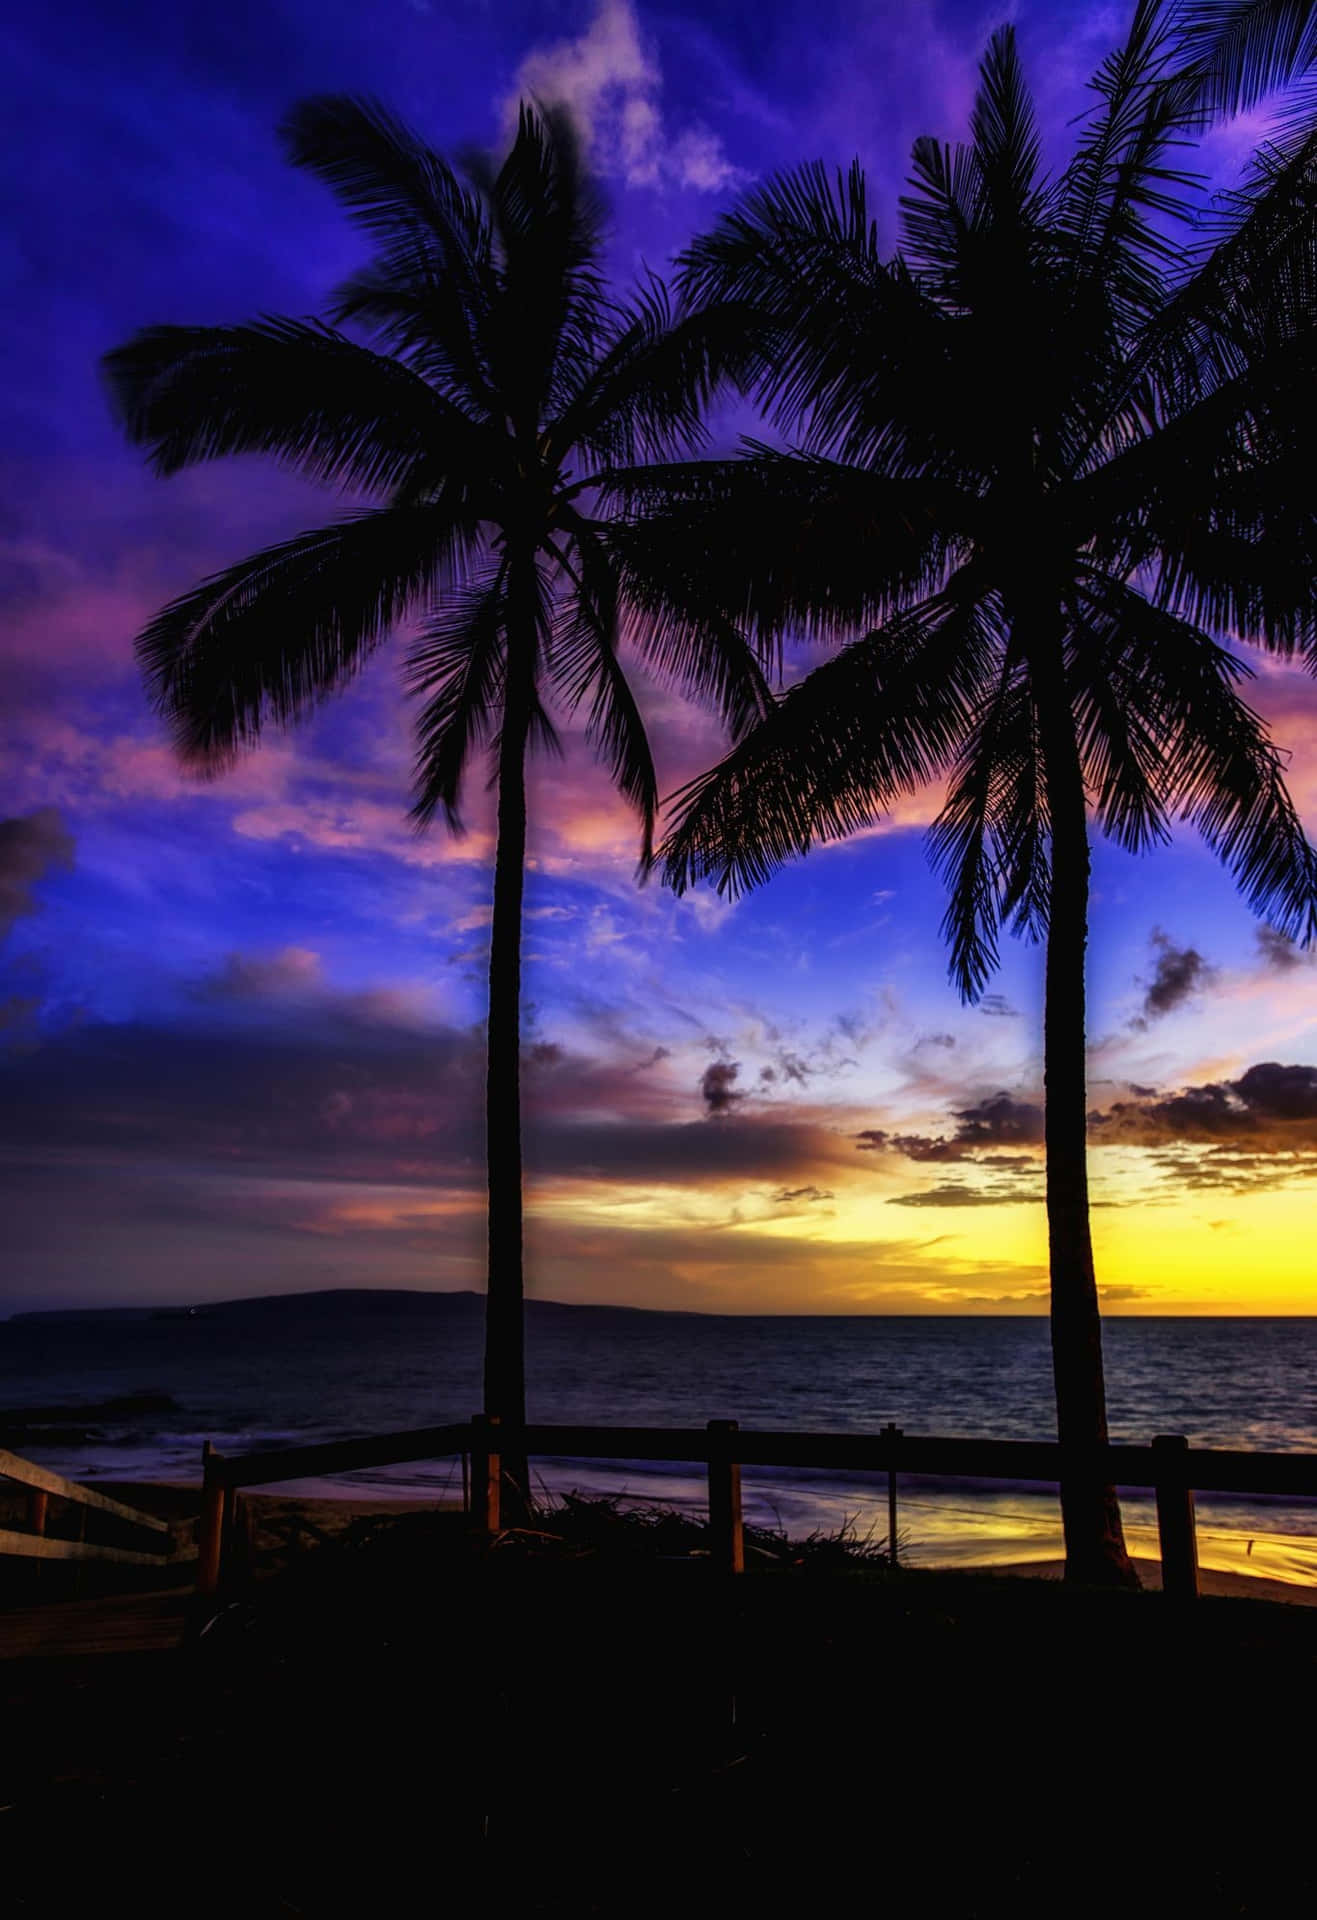 A Sunset With Palm Trees In The Background